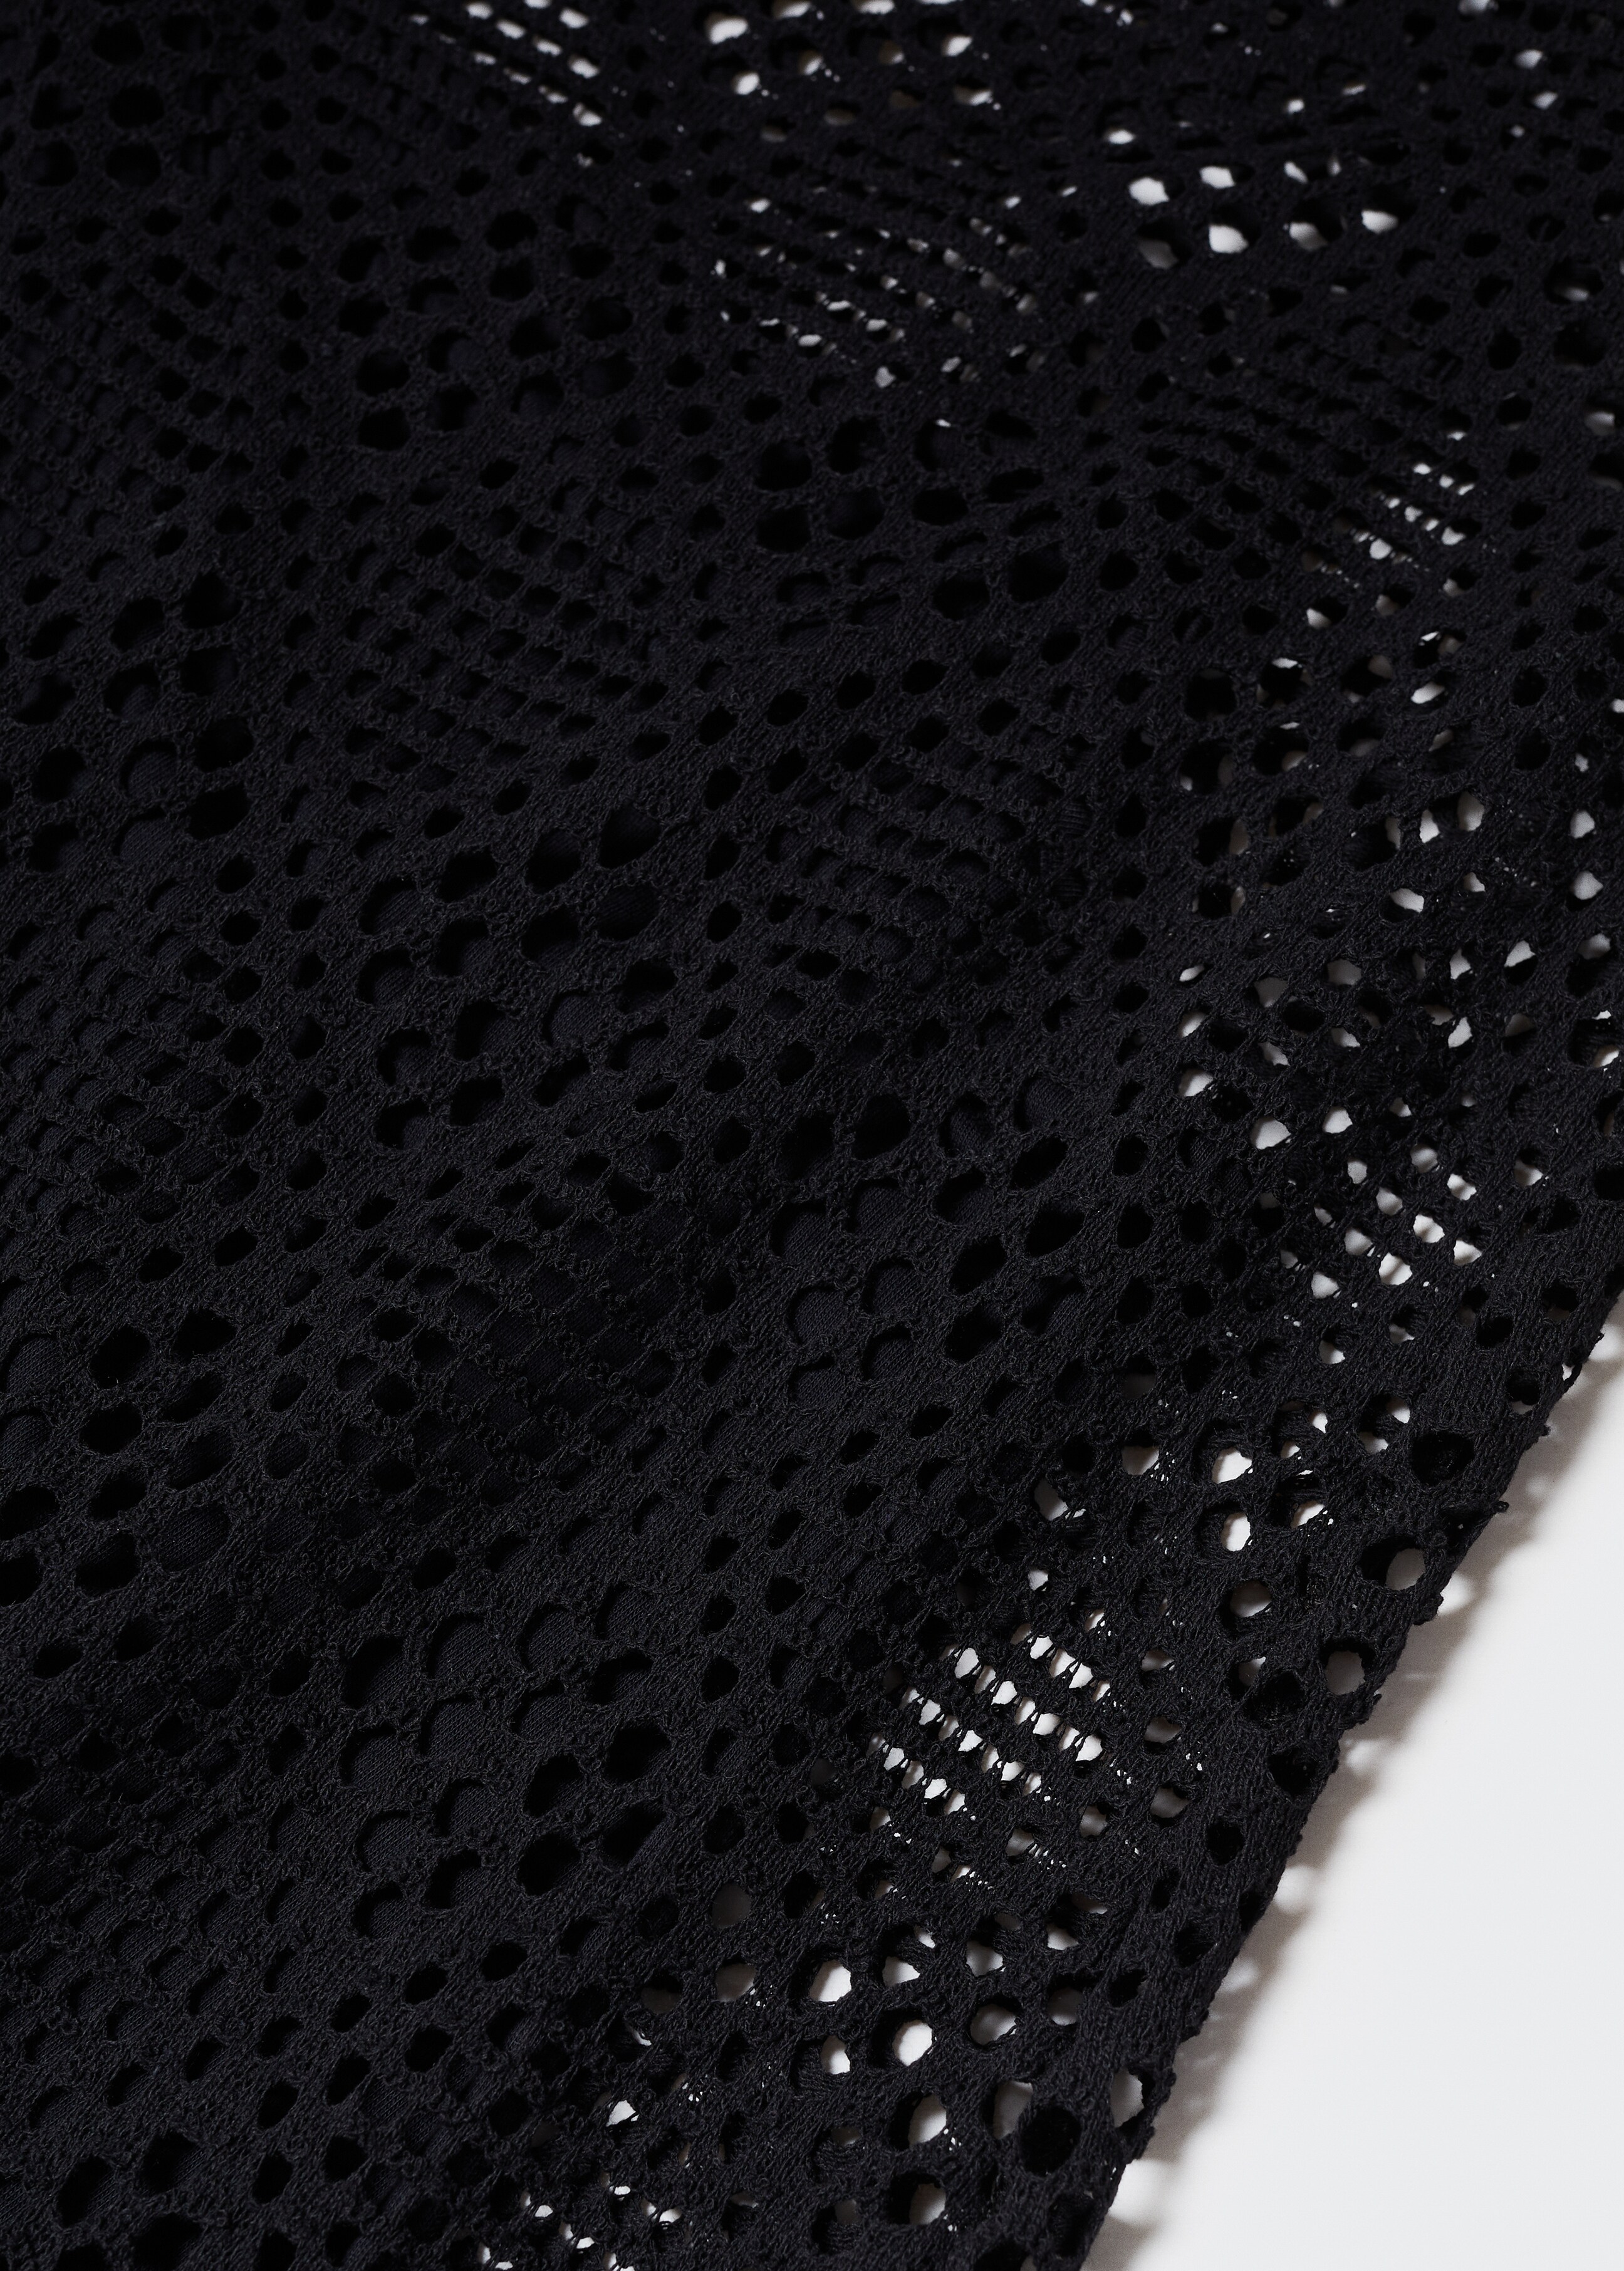 Geometric-pattern openwork dress - Details of the article 8